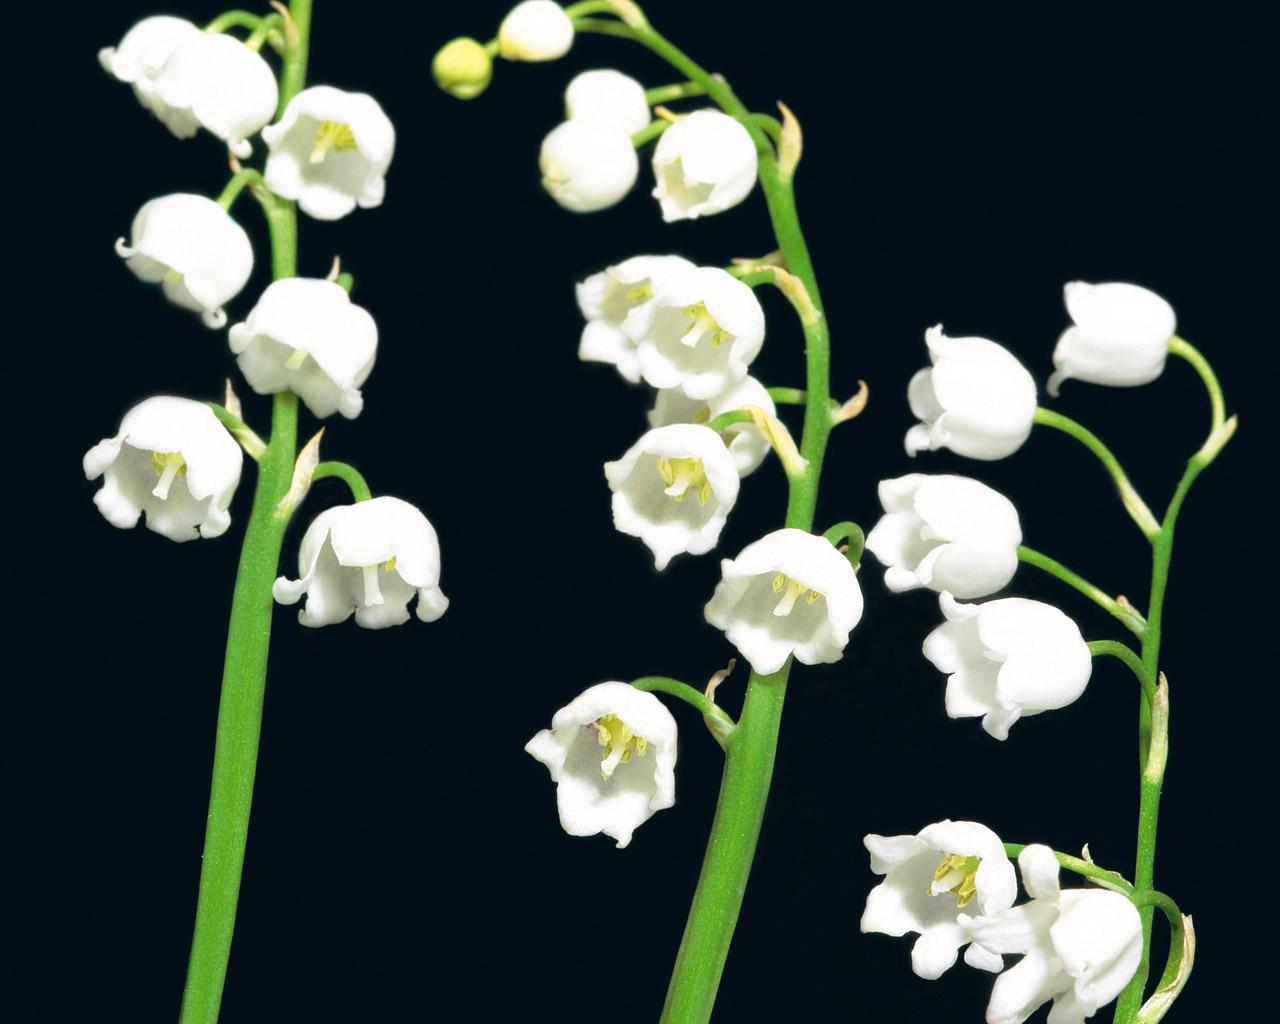 Lily of the valley wallpaper. Lily of the valley